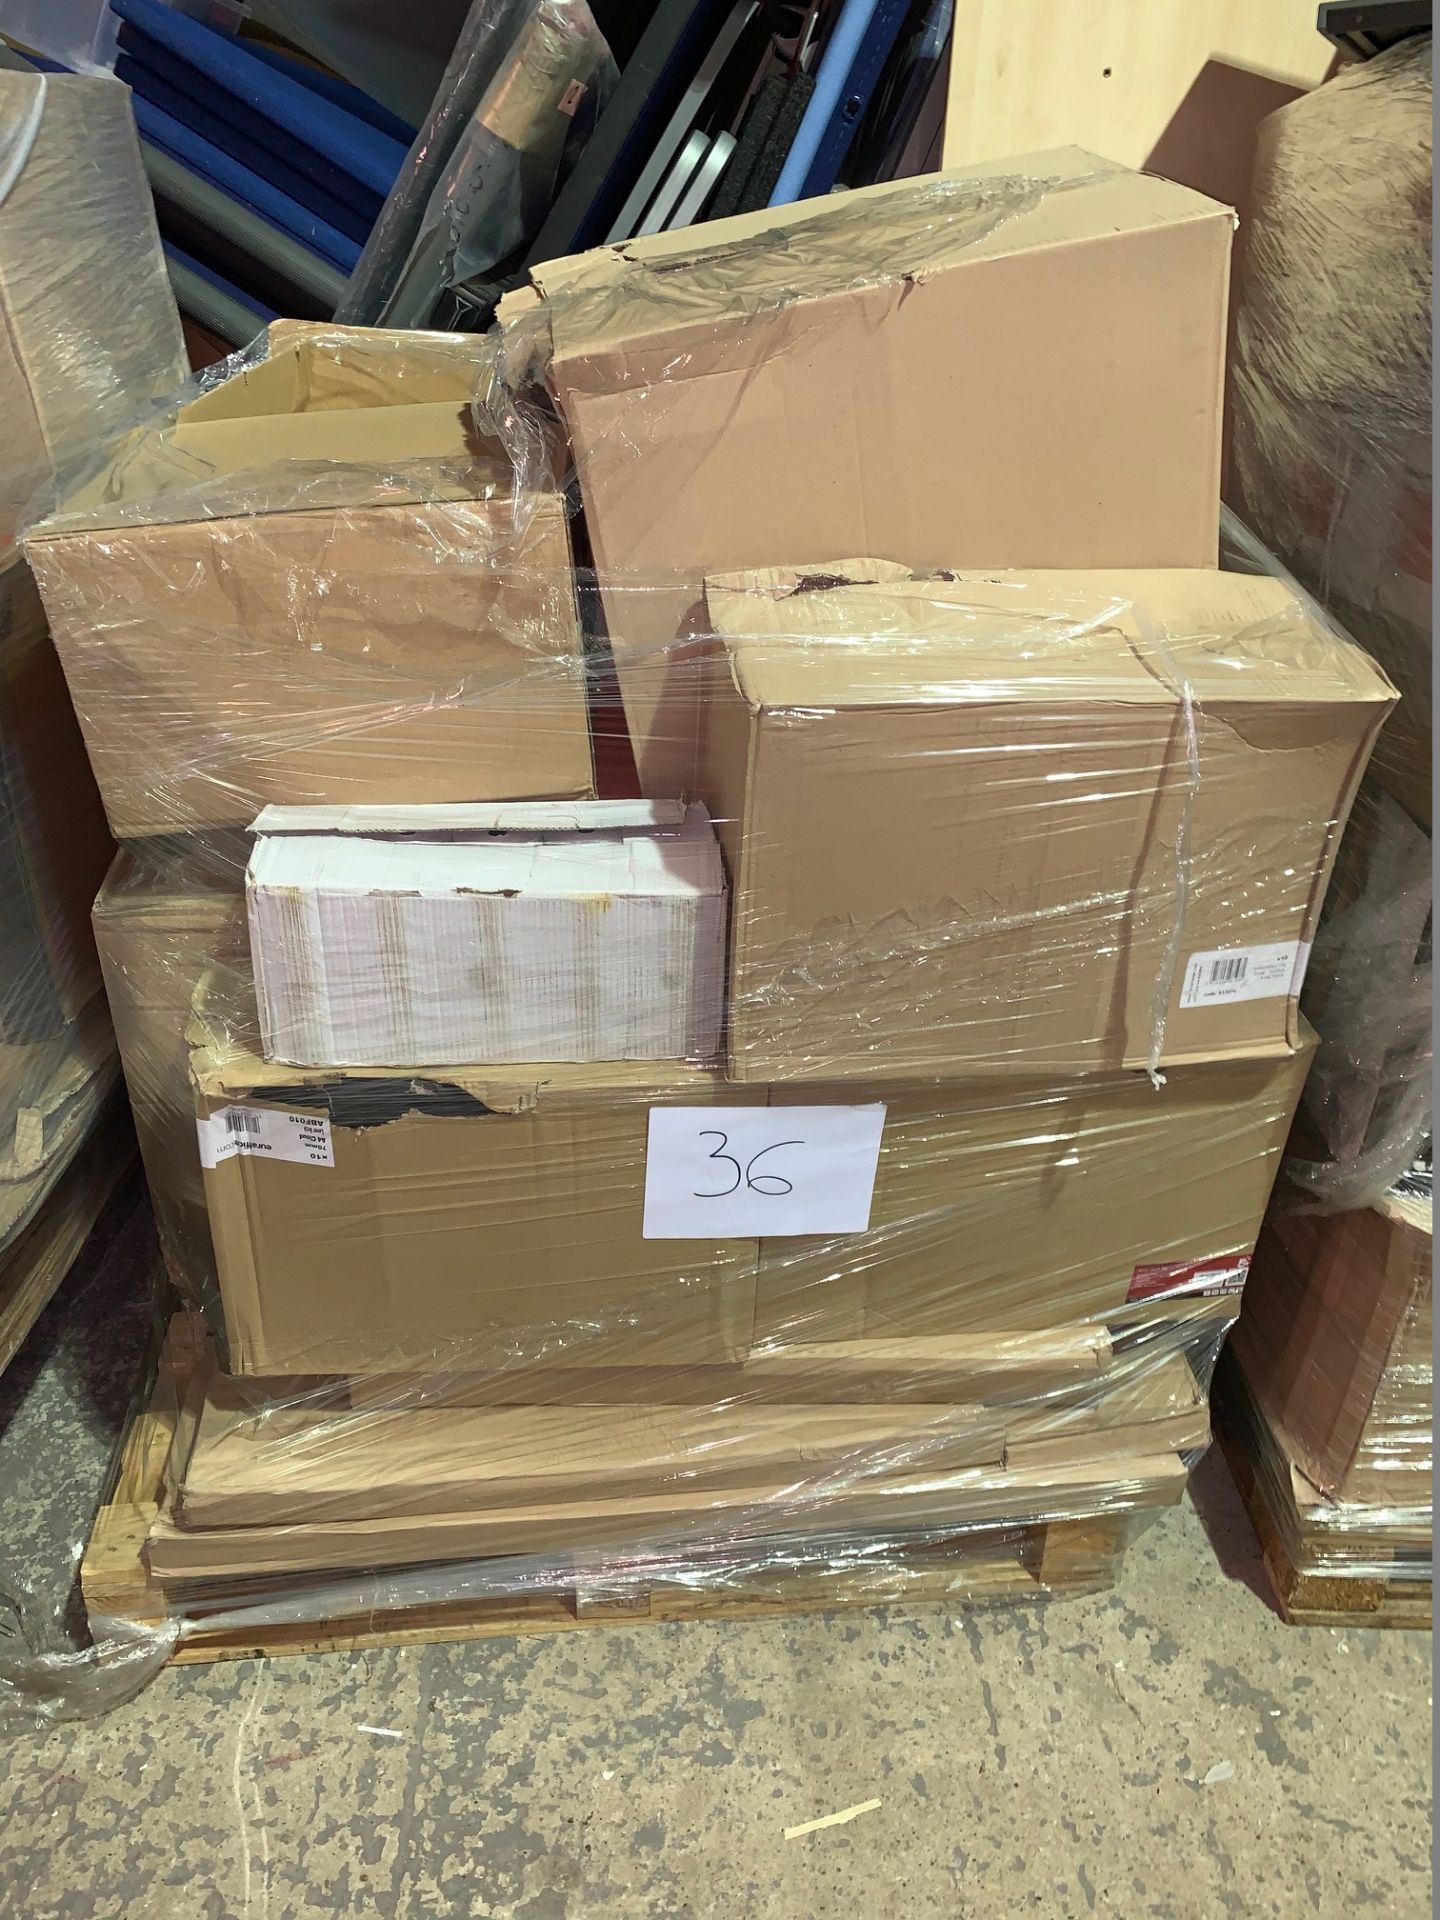 1 x Pallet of Mixed Stock/Stationery Including Box Files, Archive Boxes, Lever Arch Files, Square